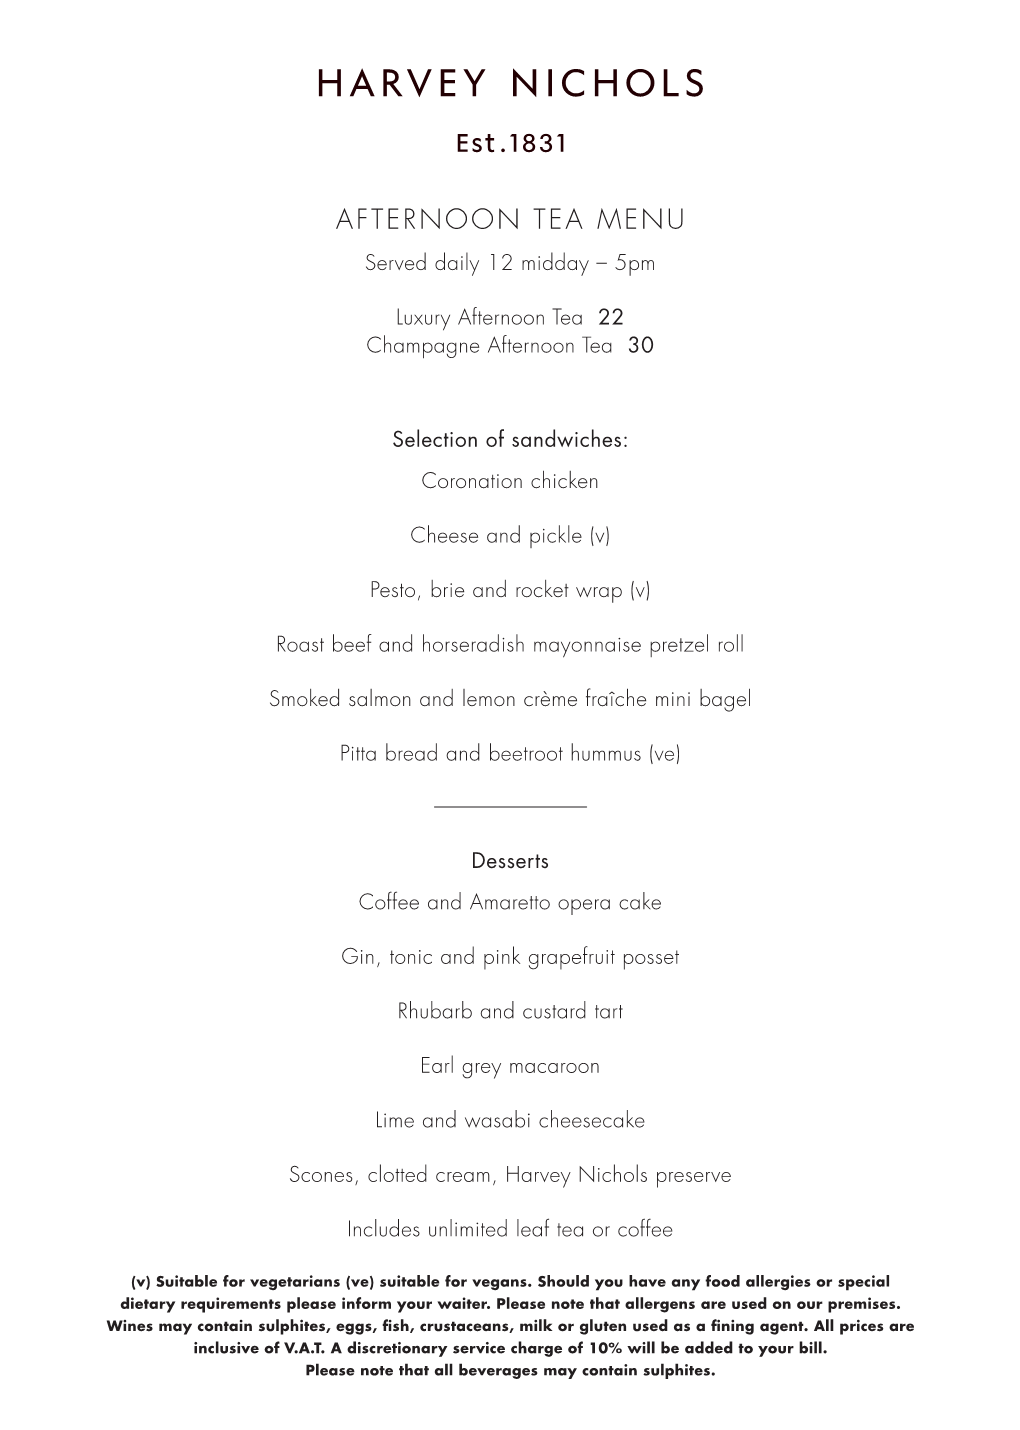 AFTERNOON TEA MENU Served Daily 12 Midday – 5Pm